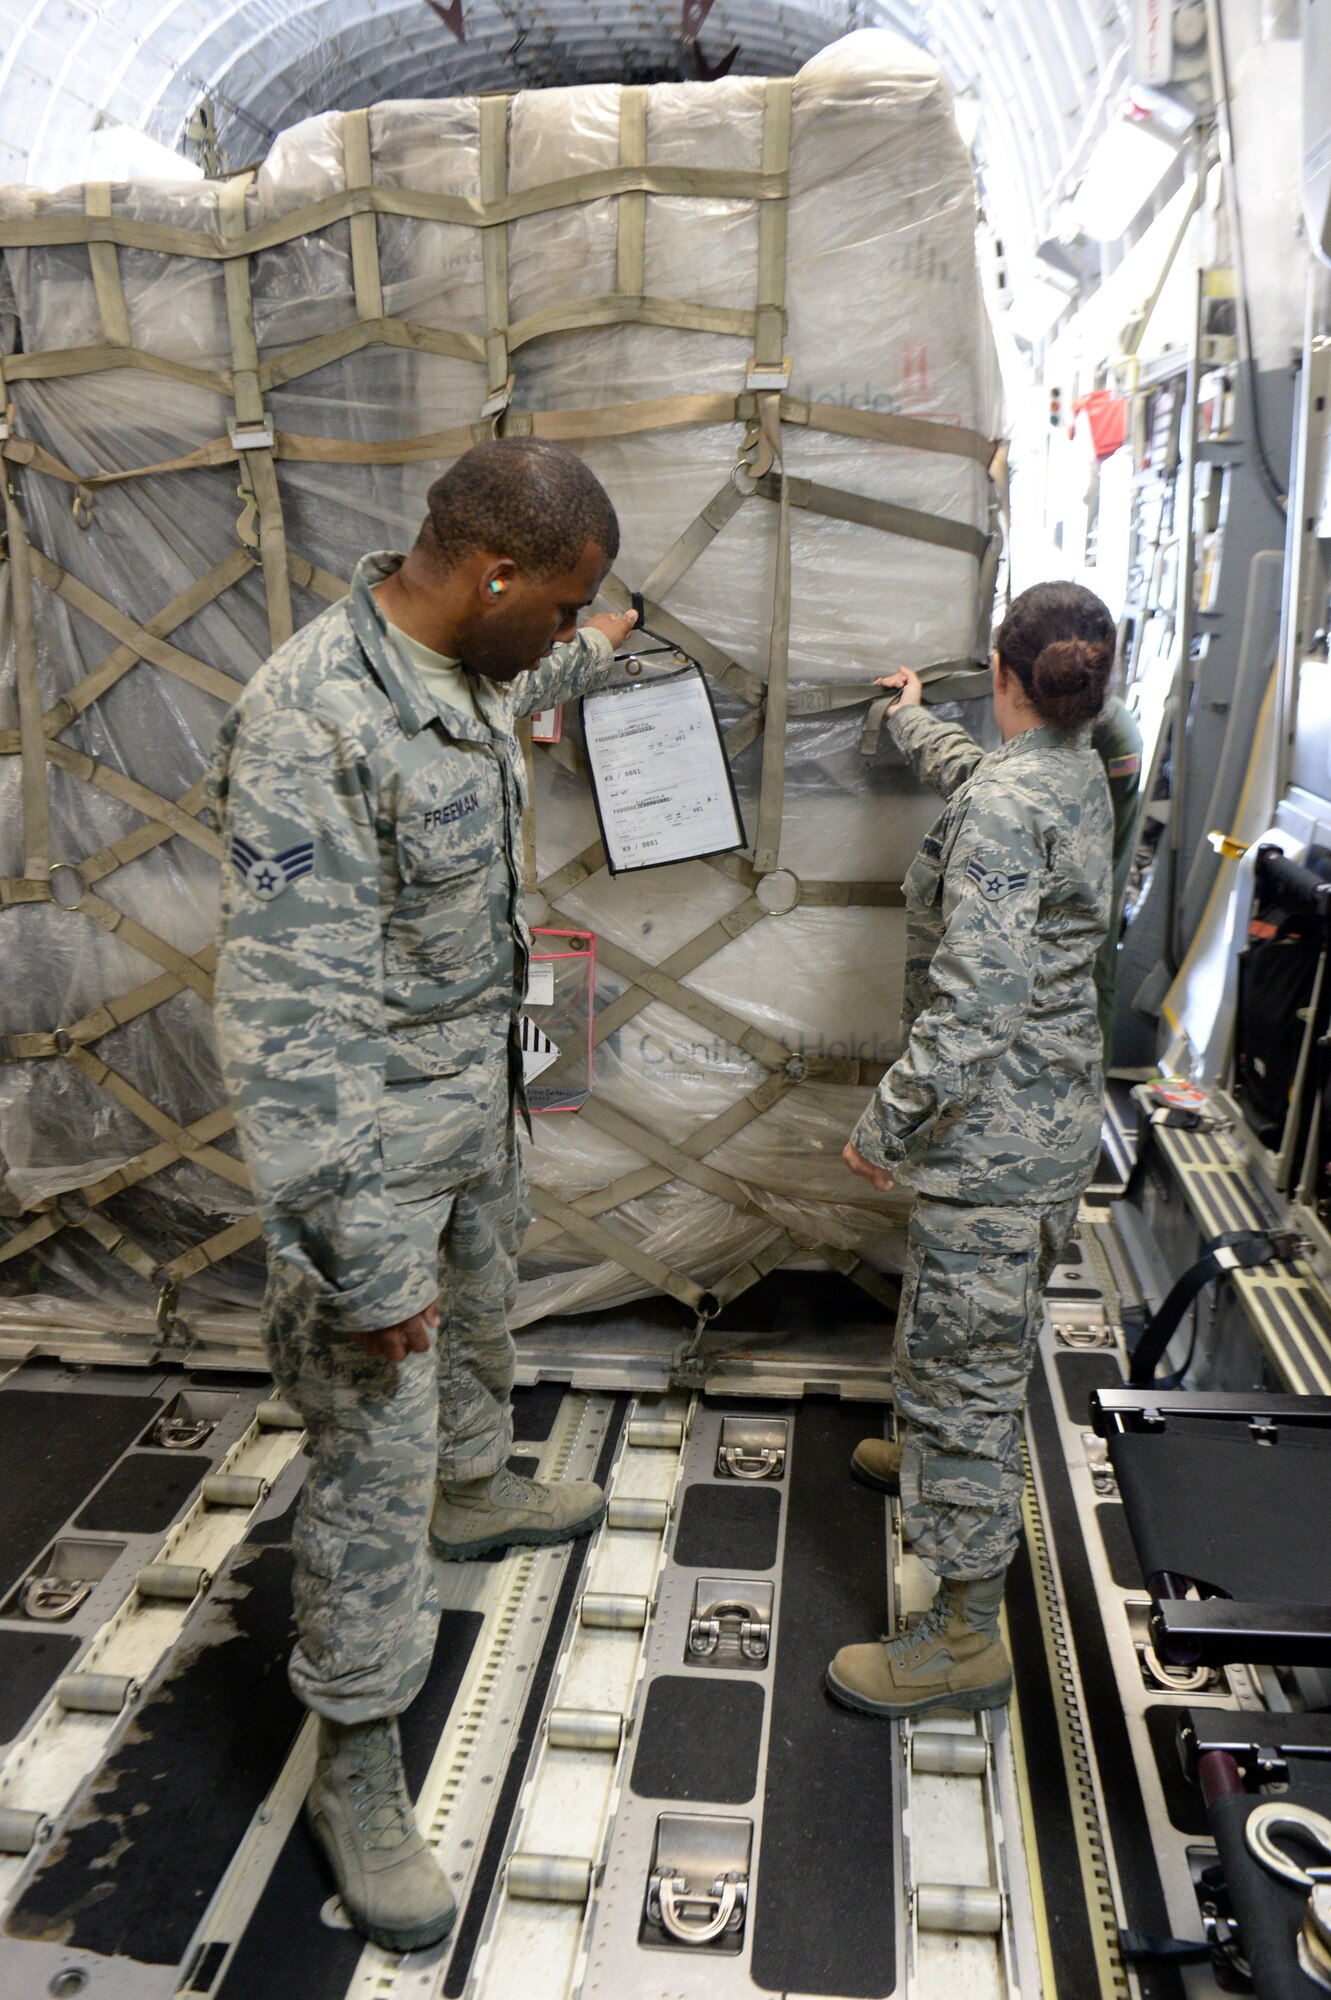 Squadron personnel specialist, out of Hurlburt Field, Fla., help load a pallet on a C-17 Globemaster III from the 62nd Airlift Wing out of Joint Base Lewis-McChord, Wash., at Base Aerea Coronel Hector Caraccioli Moncada in La Ceiba, Honduras, Aug. 28, 2015. The Airmen and gear were part of the New Horizons Honduras 2015 training exercise and redeployed to Hurlburt Field, Fla. New Horizons was launched in the 1980s and is an annual joint humanitarian assistance exercise that U.S. Southern Command conducts with a partner nation in Central America, South America or the Caribbean. The exercise improves joint training readiness of U.S. and partner nation civil engineers, medical professionals and support personnel through humanitarian assistance activities. (U.S. Air Force photo by Capt. David J. Murphy/Released)